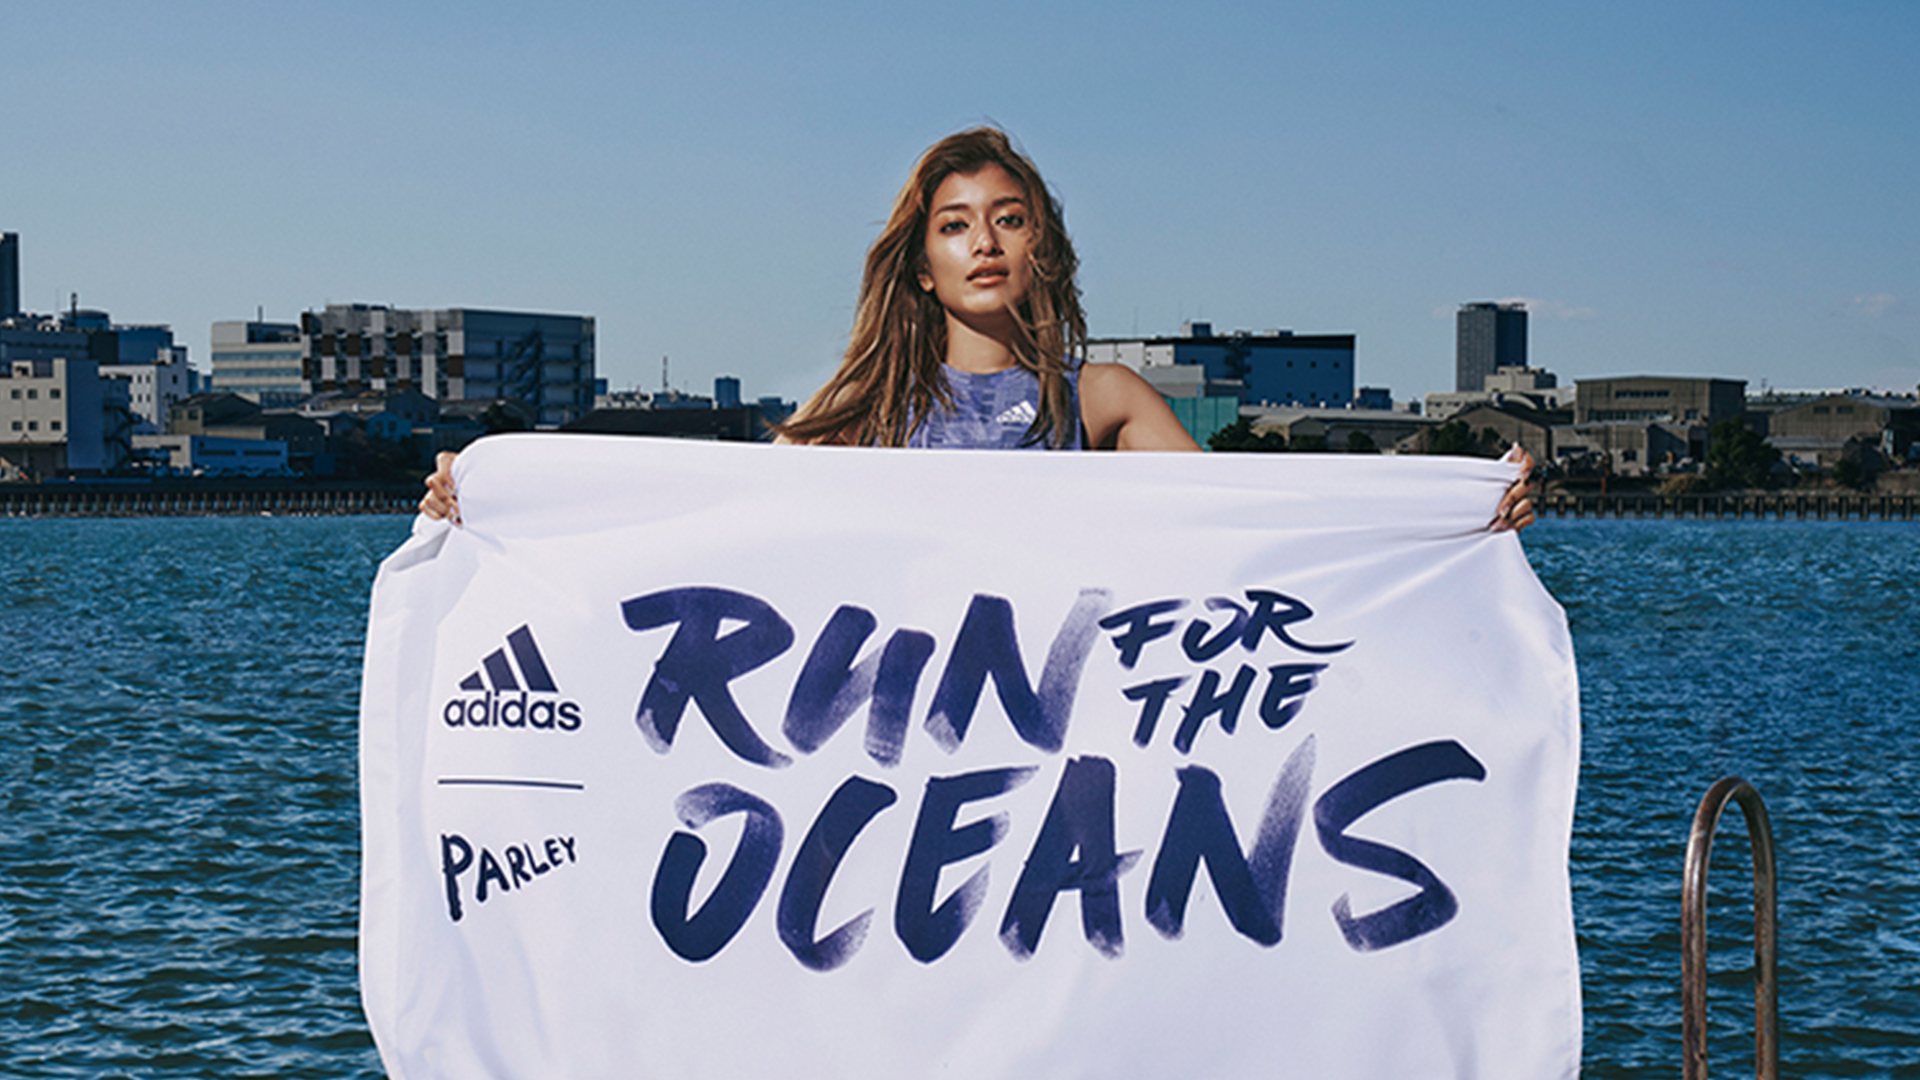 The adidas partnership with Parley for the Oceans.